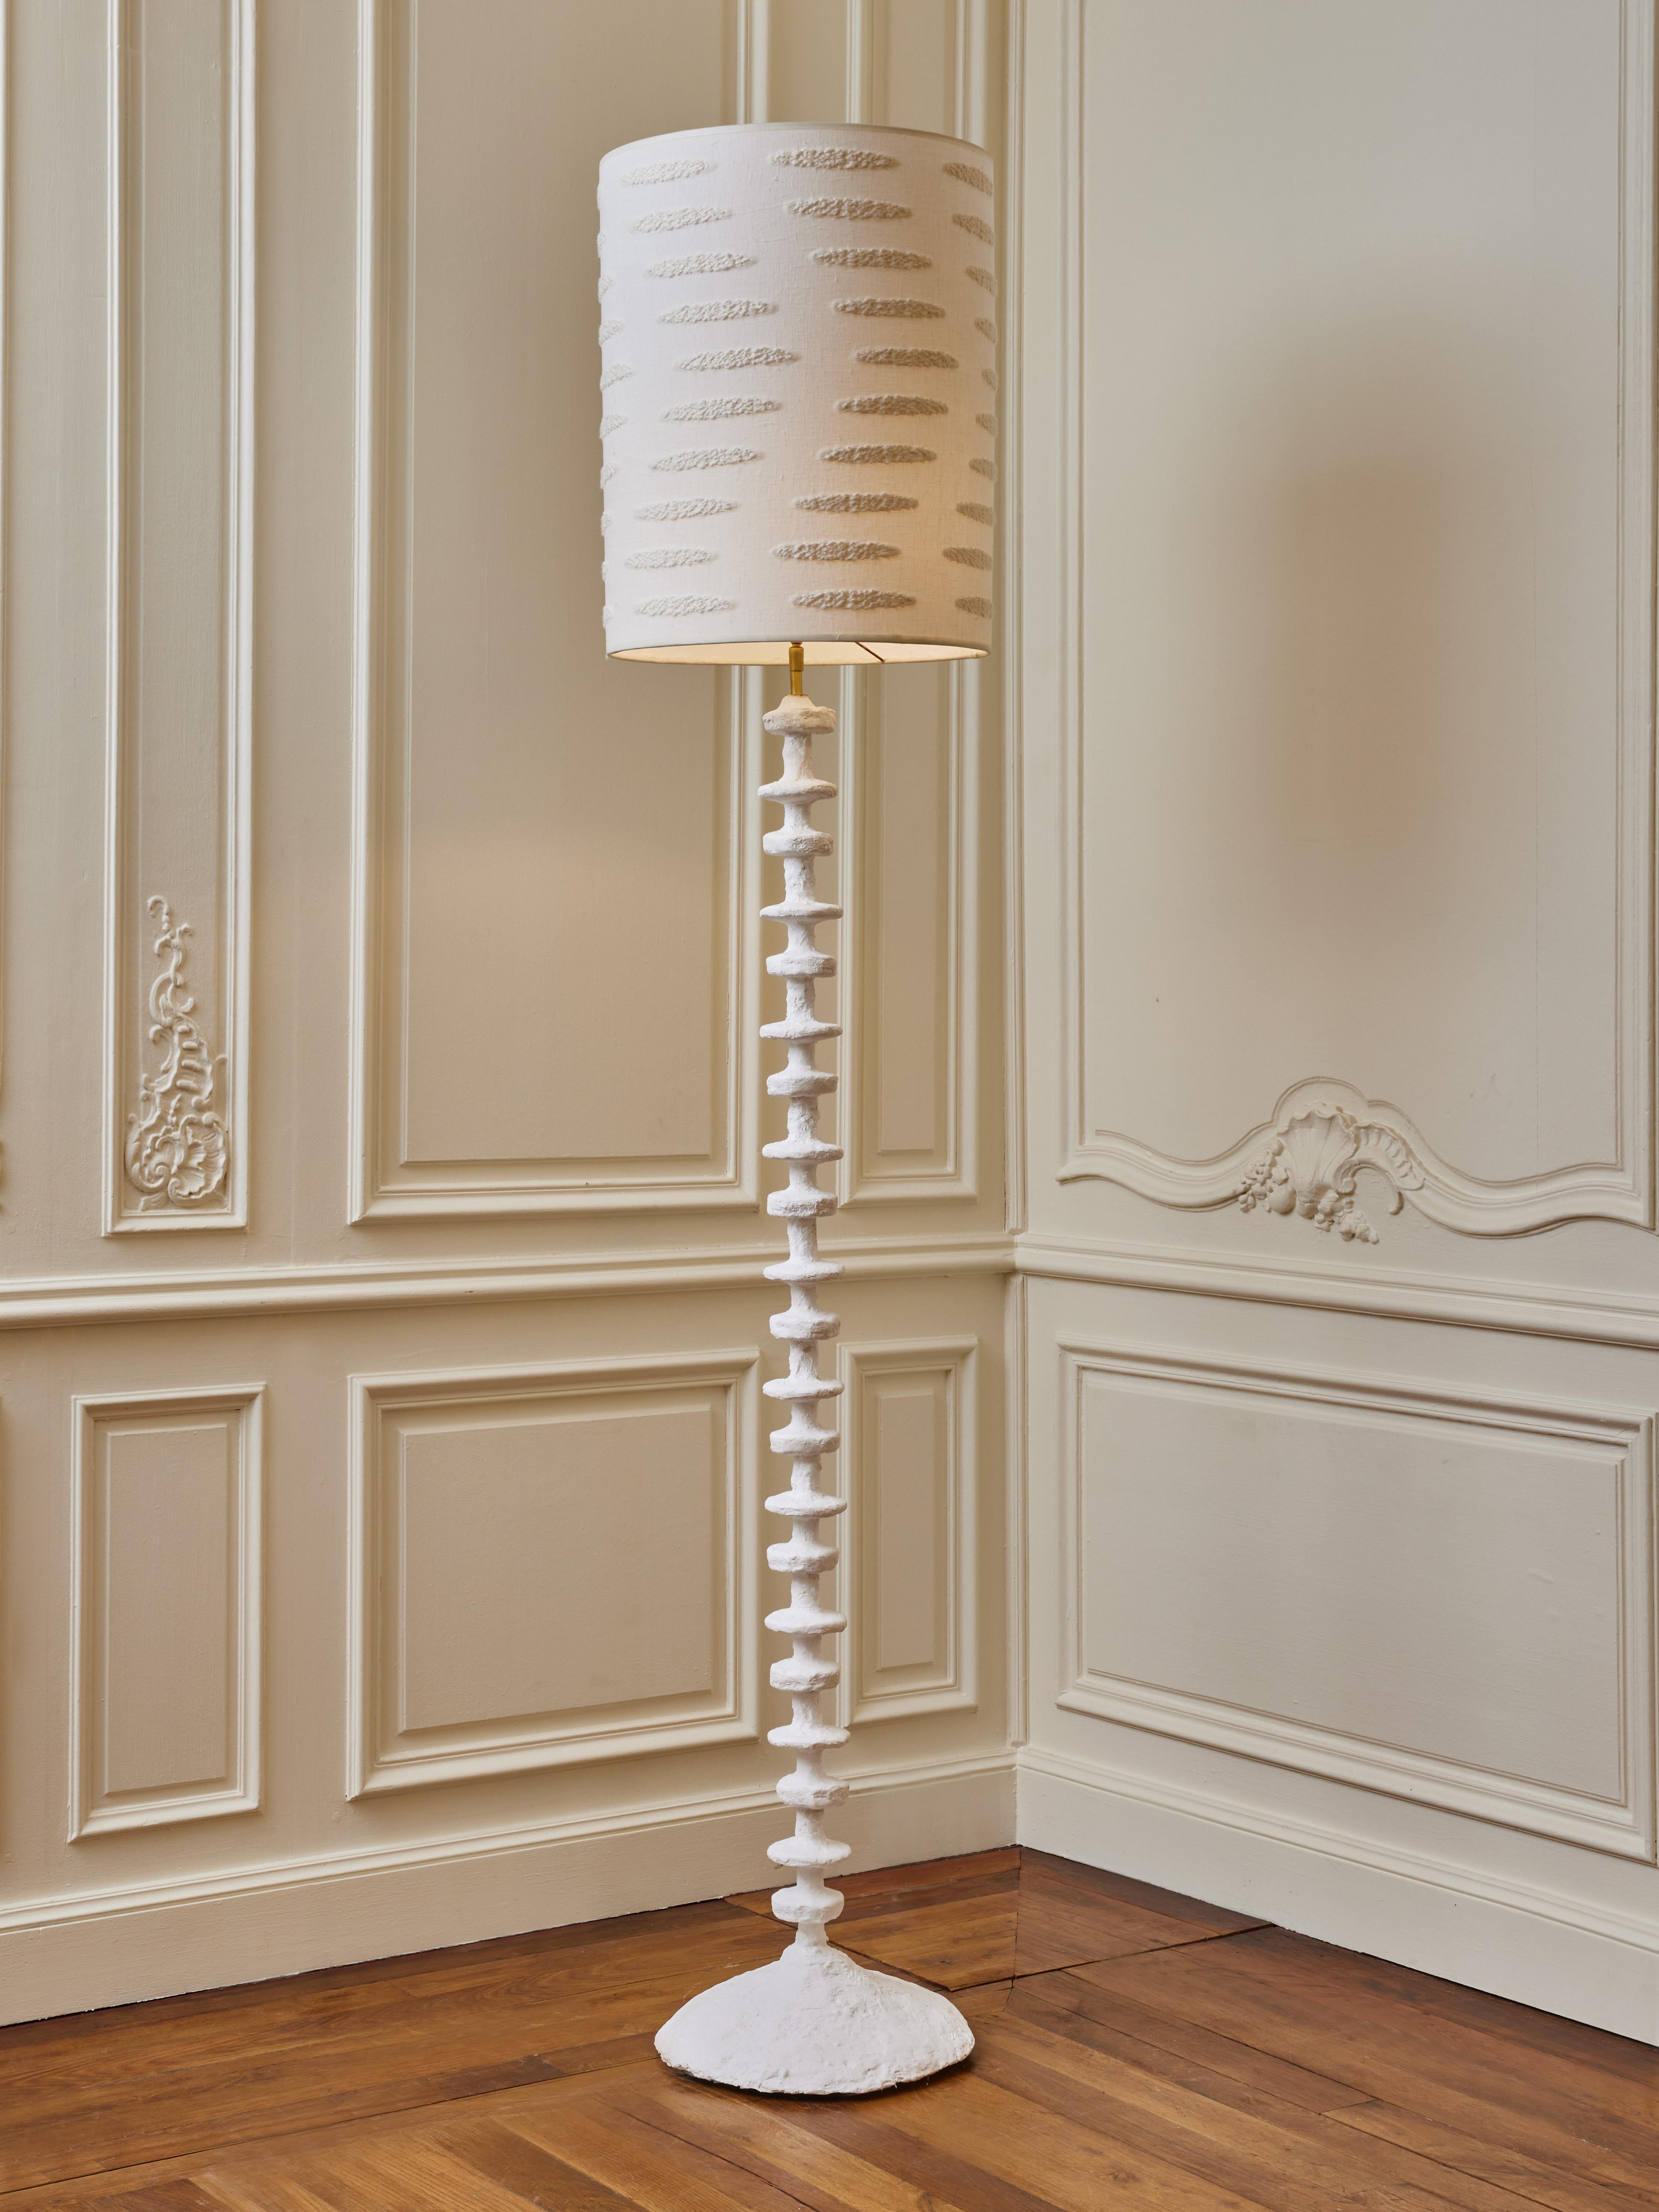 Floor lamp in sculpted plaster signed by the artist LYNX.
Custom made shade.
France, 2022

Height without shade: 150 cm.